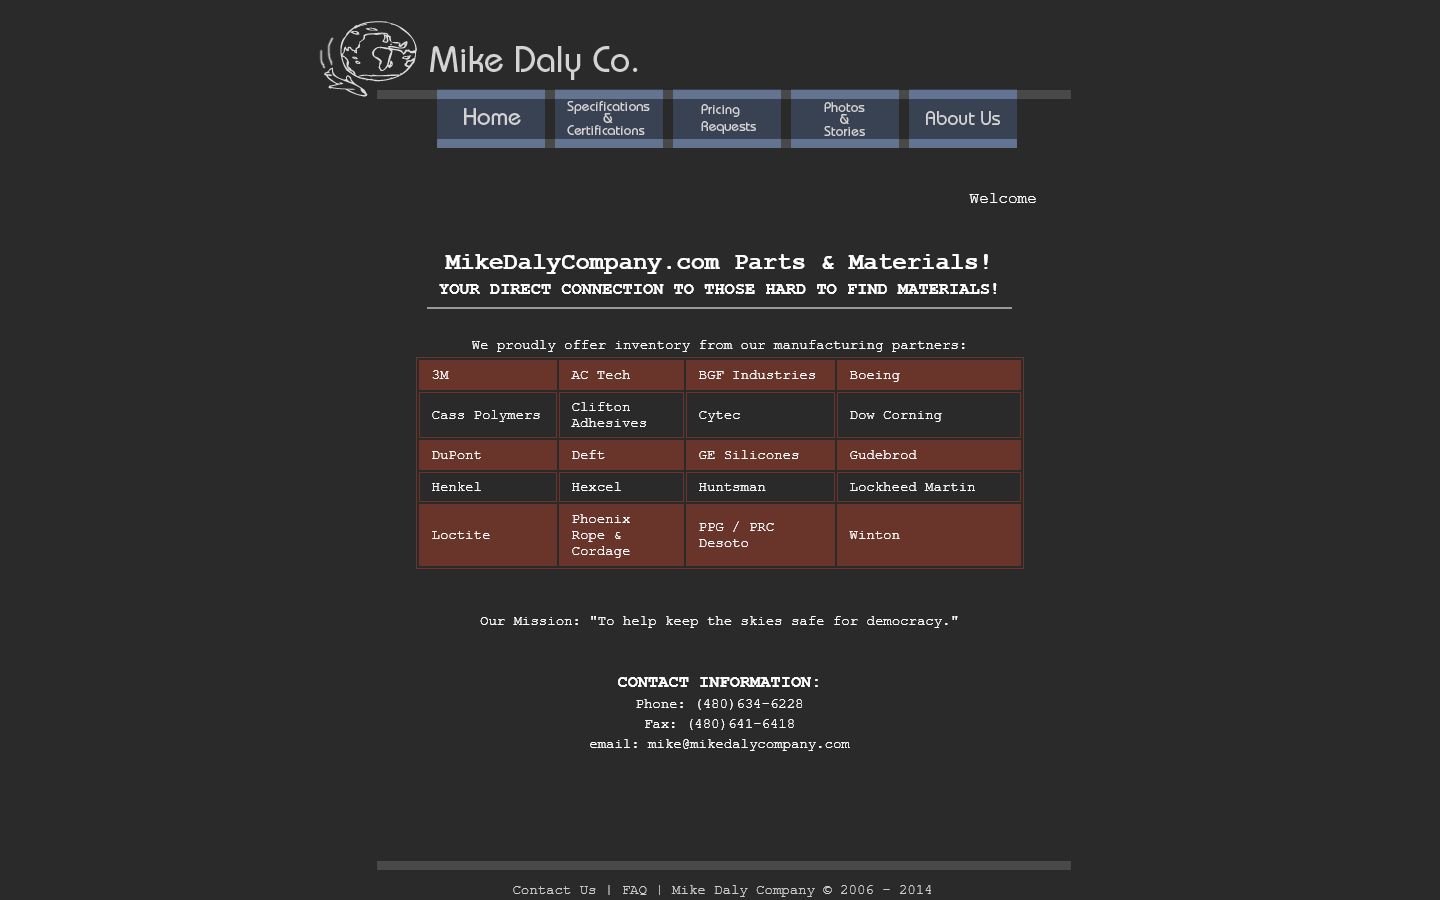 Mike Daly Company